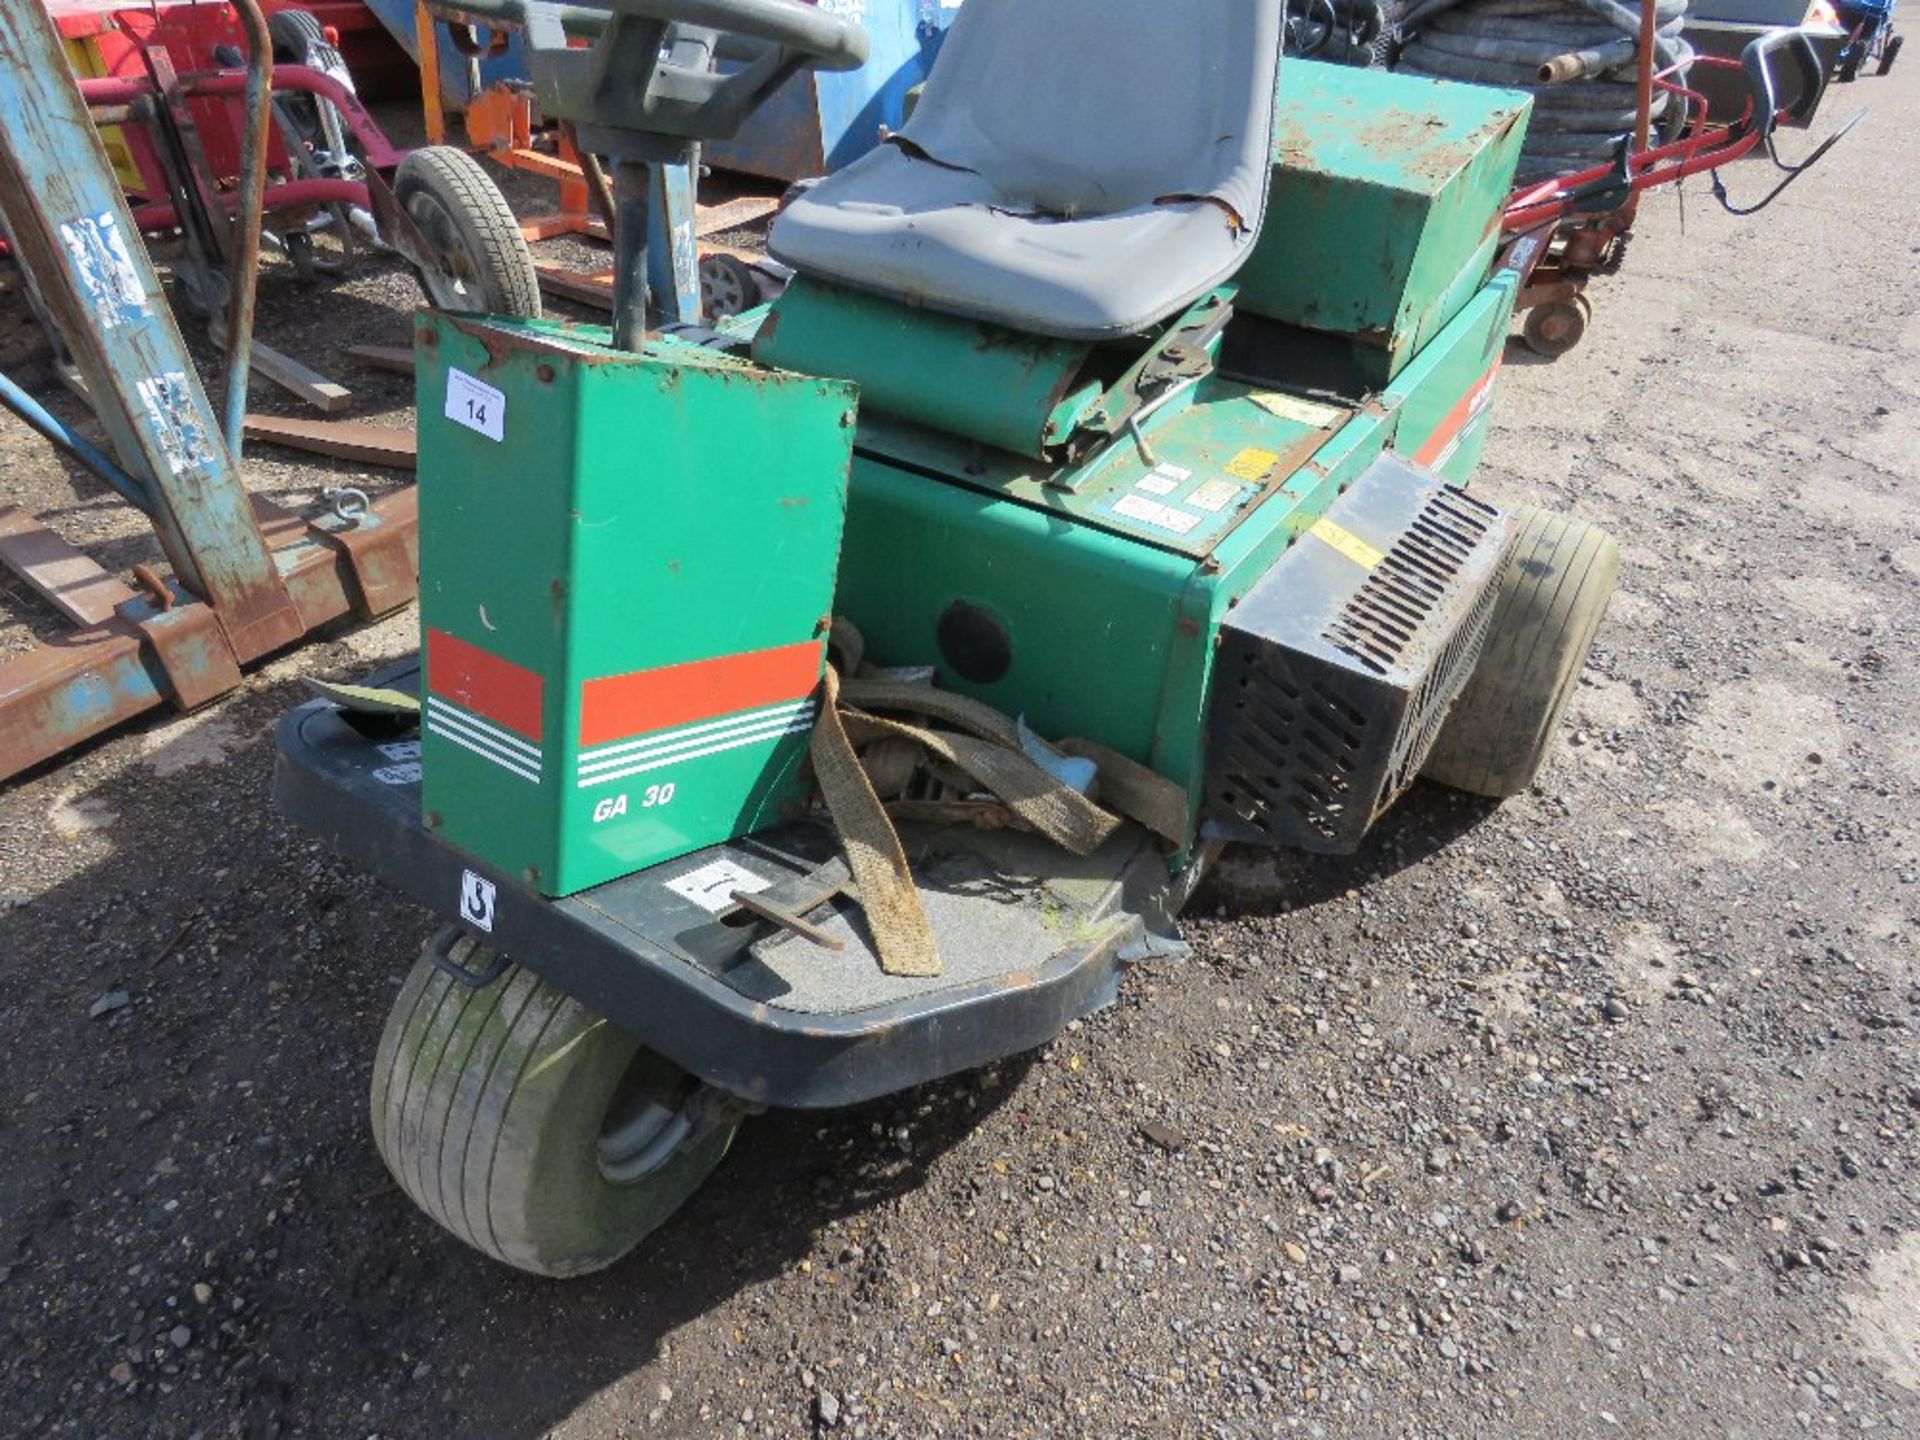 RYAN GA30 PETROL ENGINED SPIKER UNIT. UNTESTED. DIRECT FROM FOOTBALL CLUB. - Image 2 of 5